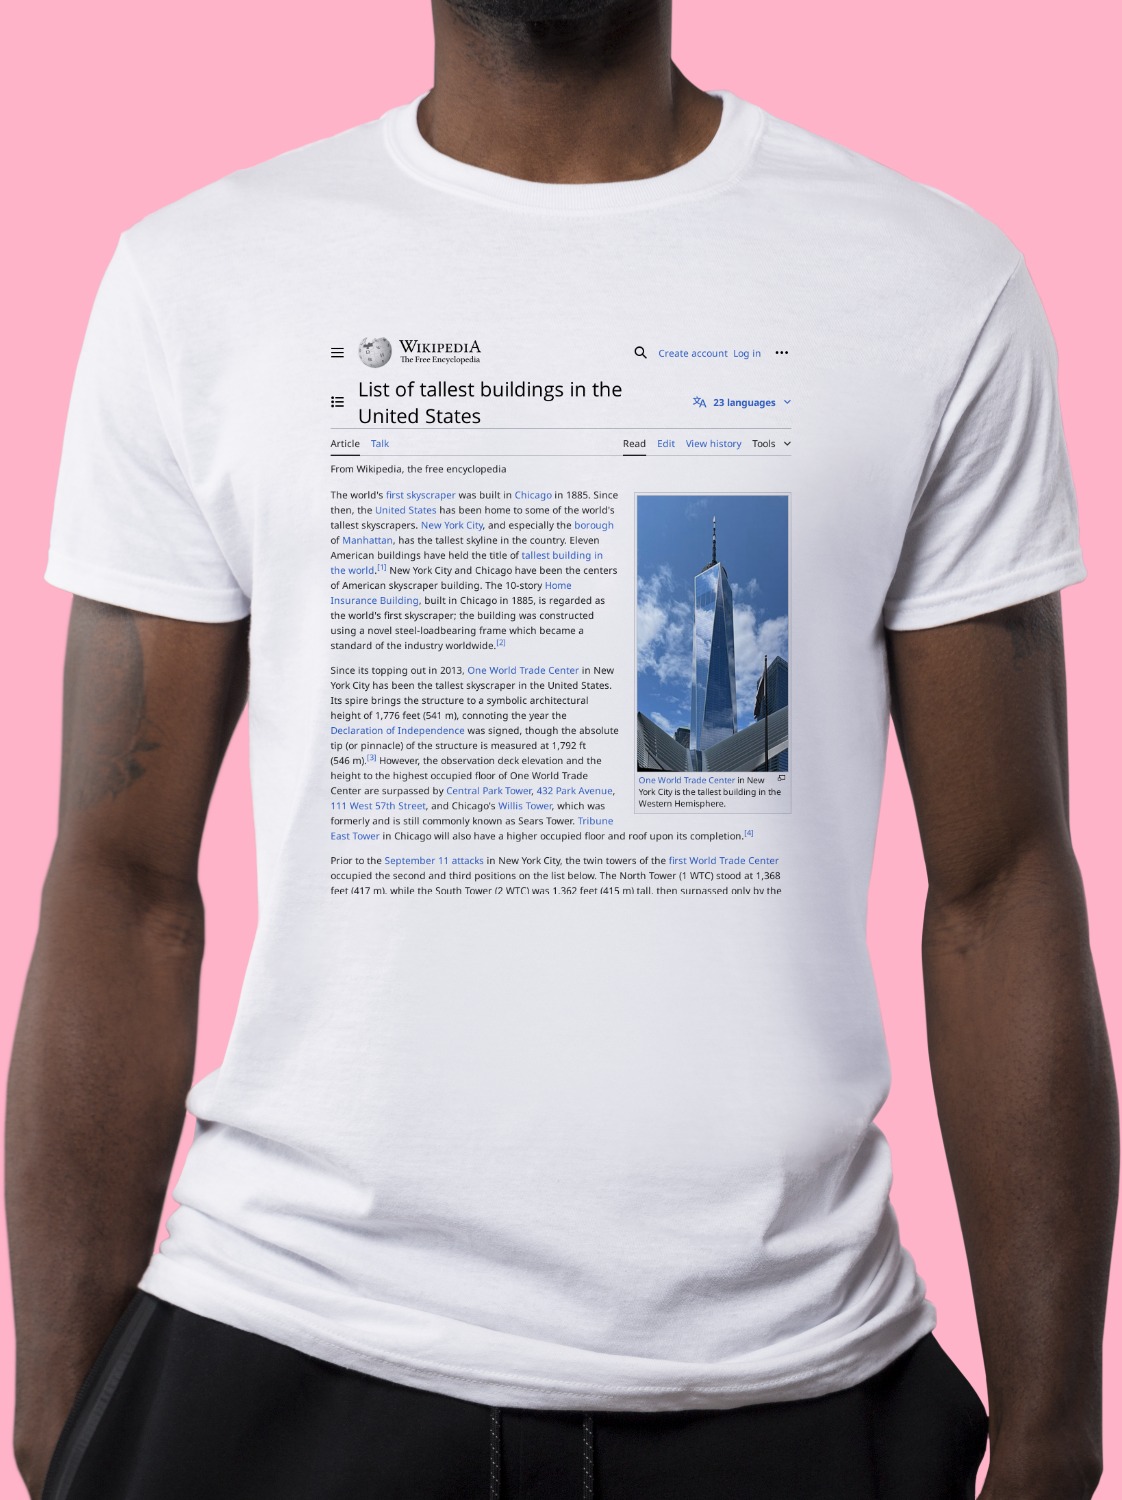 List_of_tallest_buildings_in_the_United_States Wikipedia Shirt